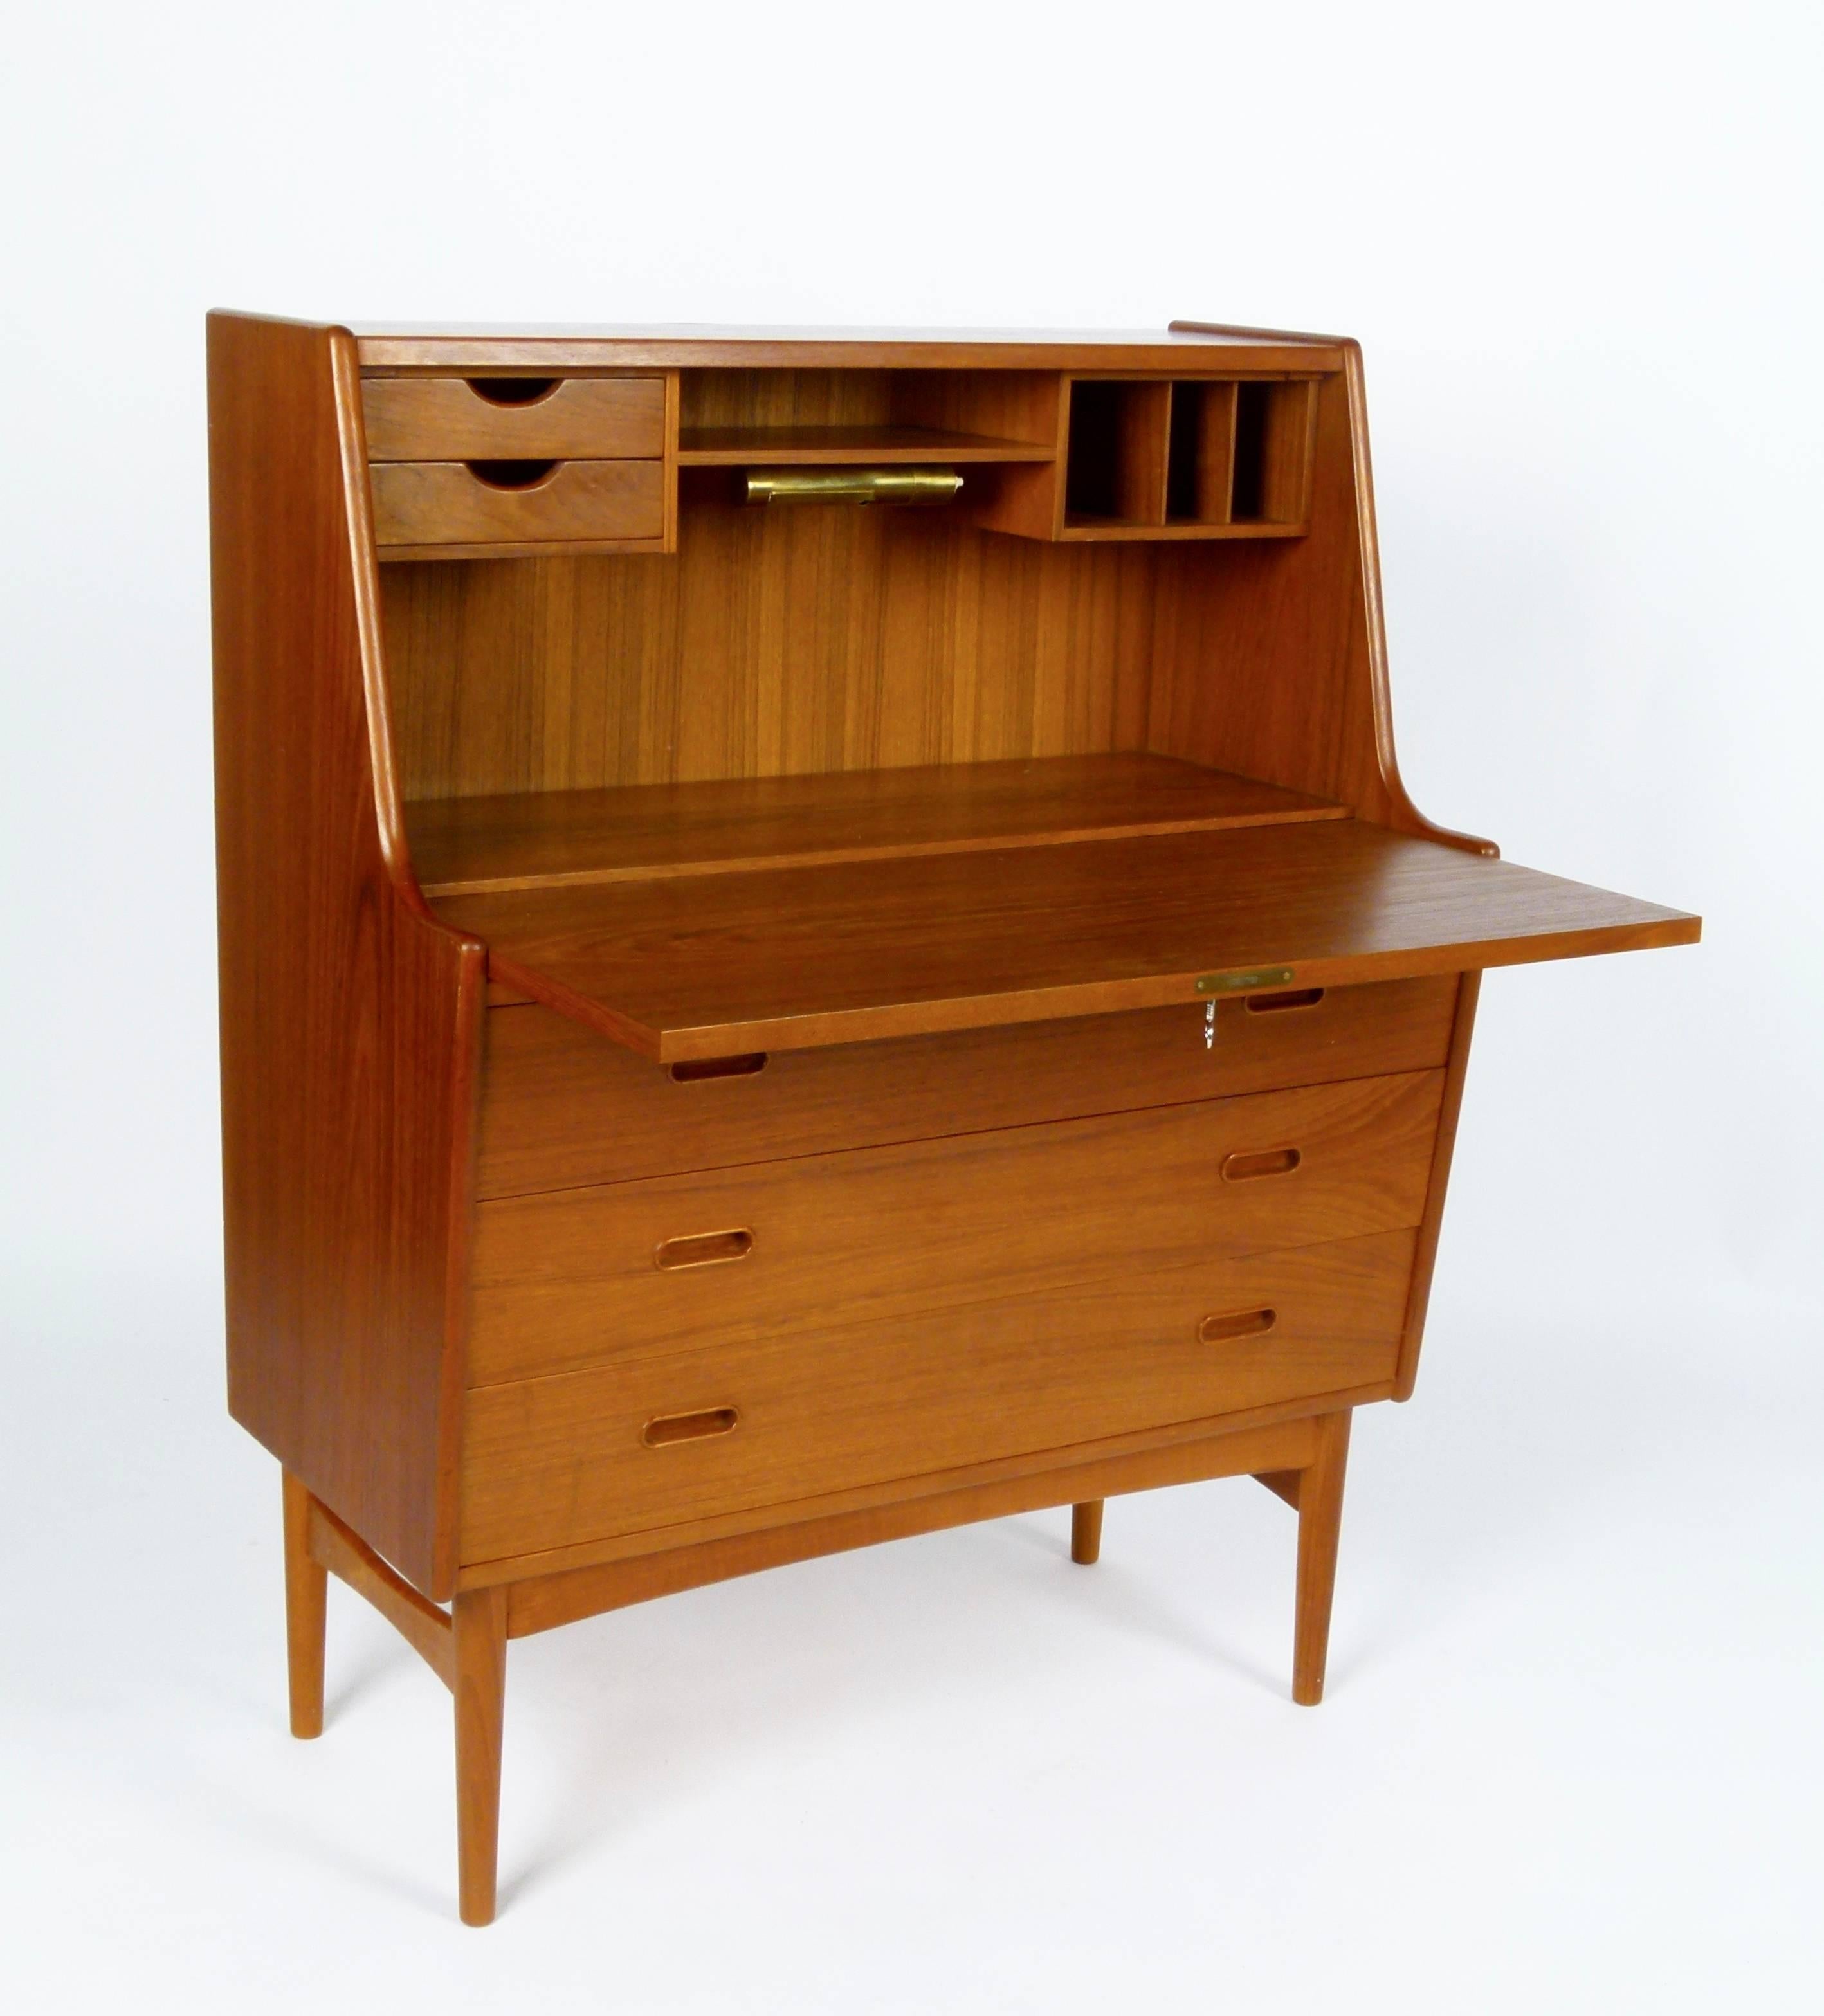 Very functional secretary in teak with three drawers and additional storage behind drop-front writing surface. Made by Vatne Mobler, Denmark. This beautifully maintained piece has its original oiled finish and key for locking the desk.